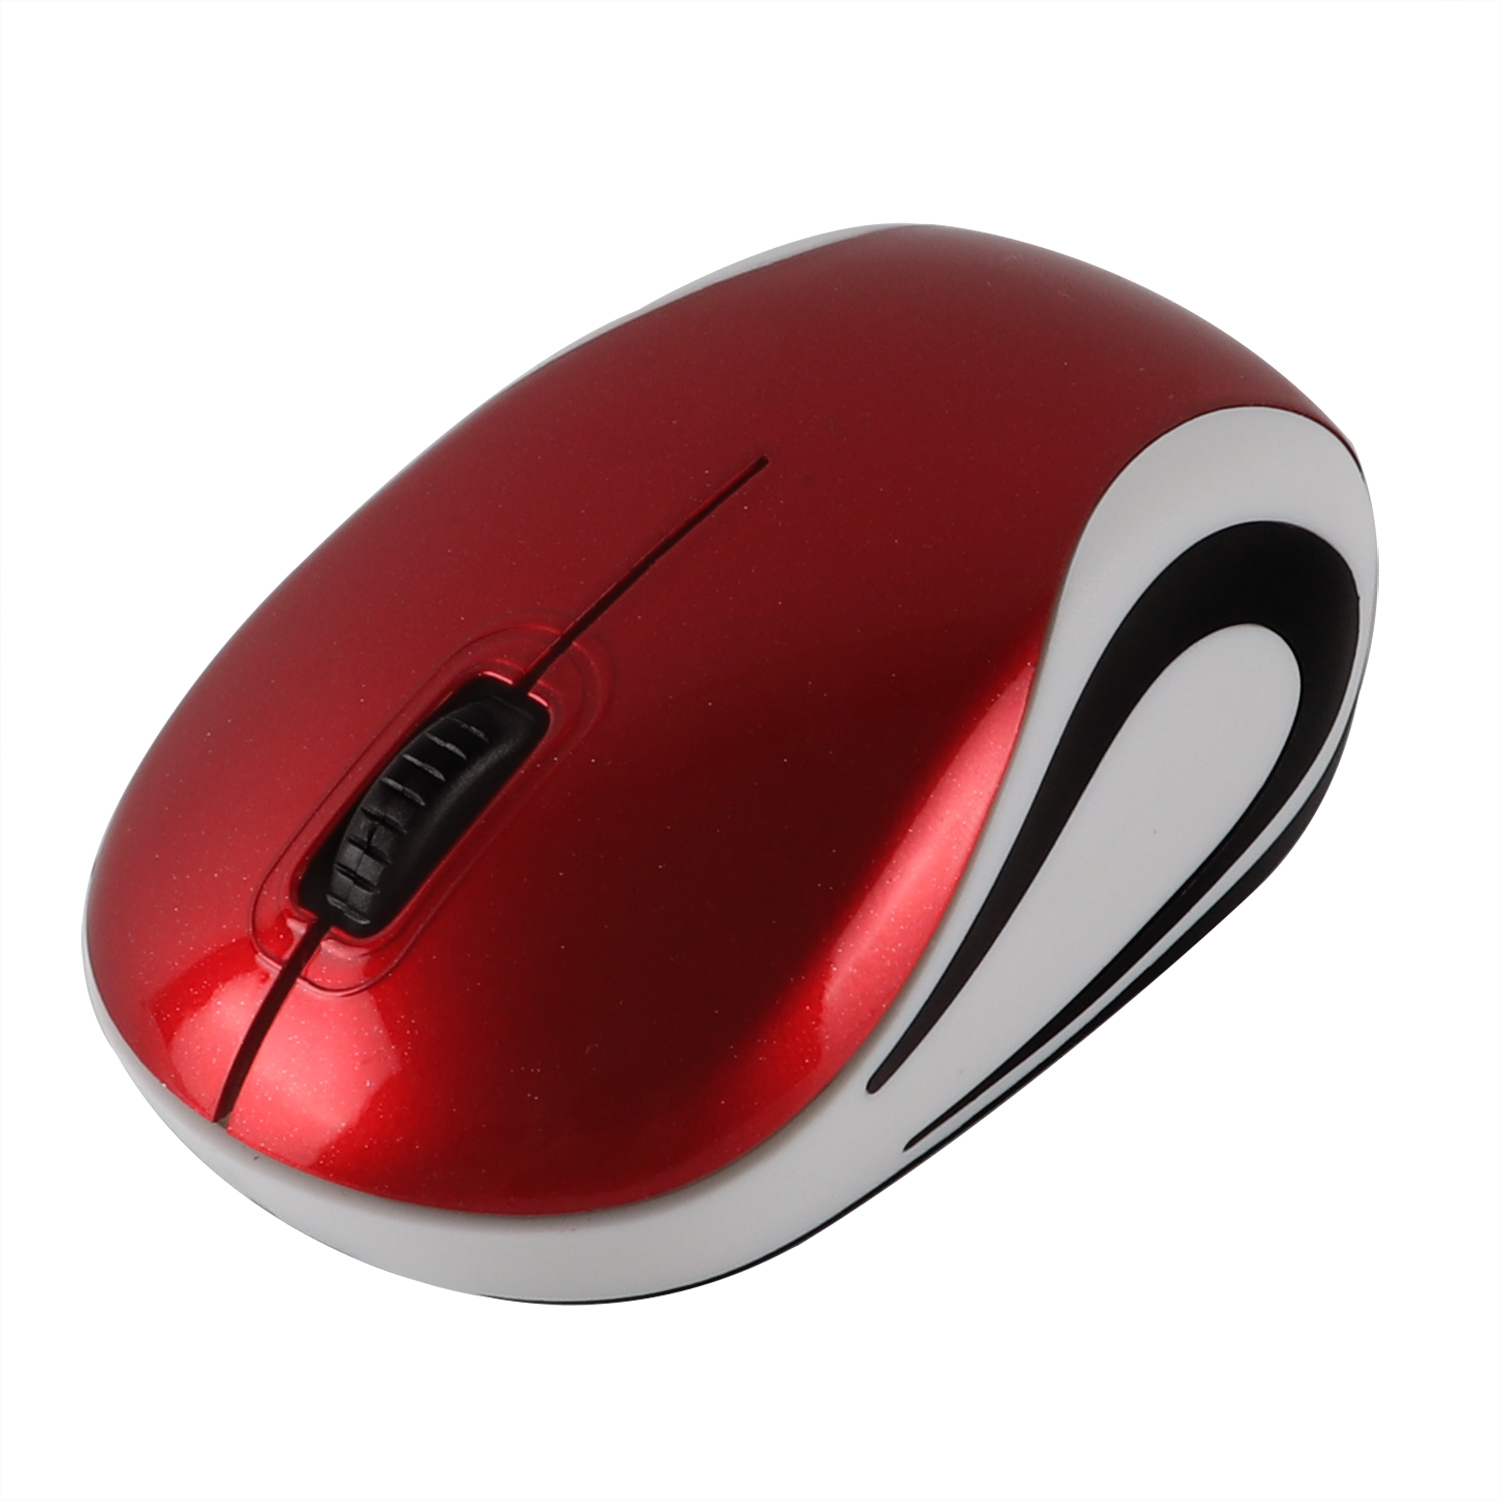 Mini-Wireless-mouse-for-Computer-2-4Ghz-Gaming-Small-Mause-1600-DPI-Optical-USB-Ergonomic-USB (7)